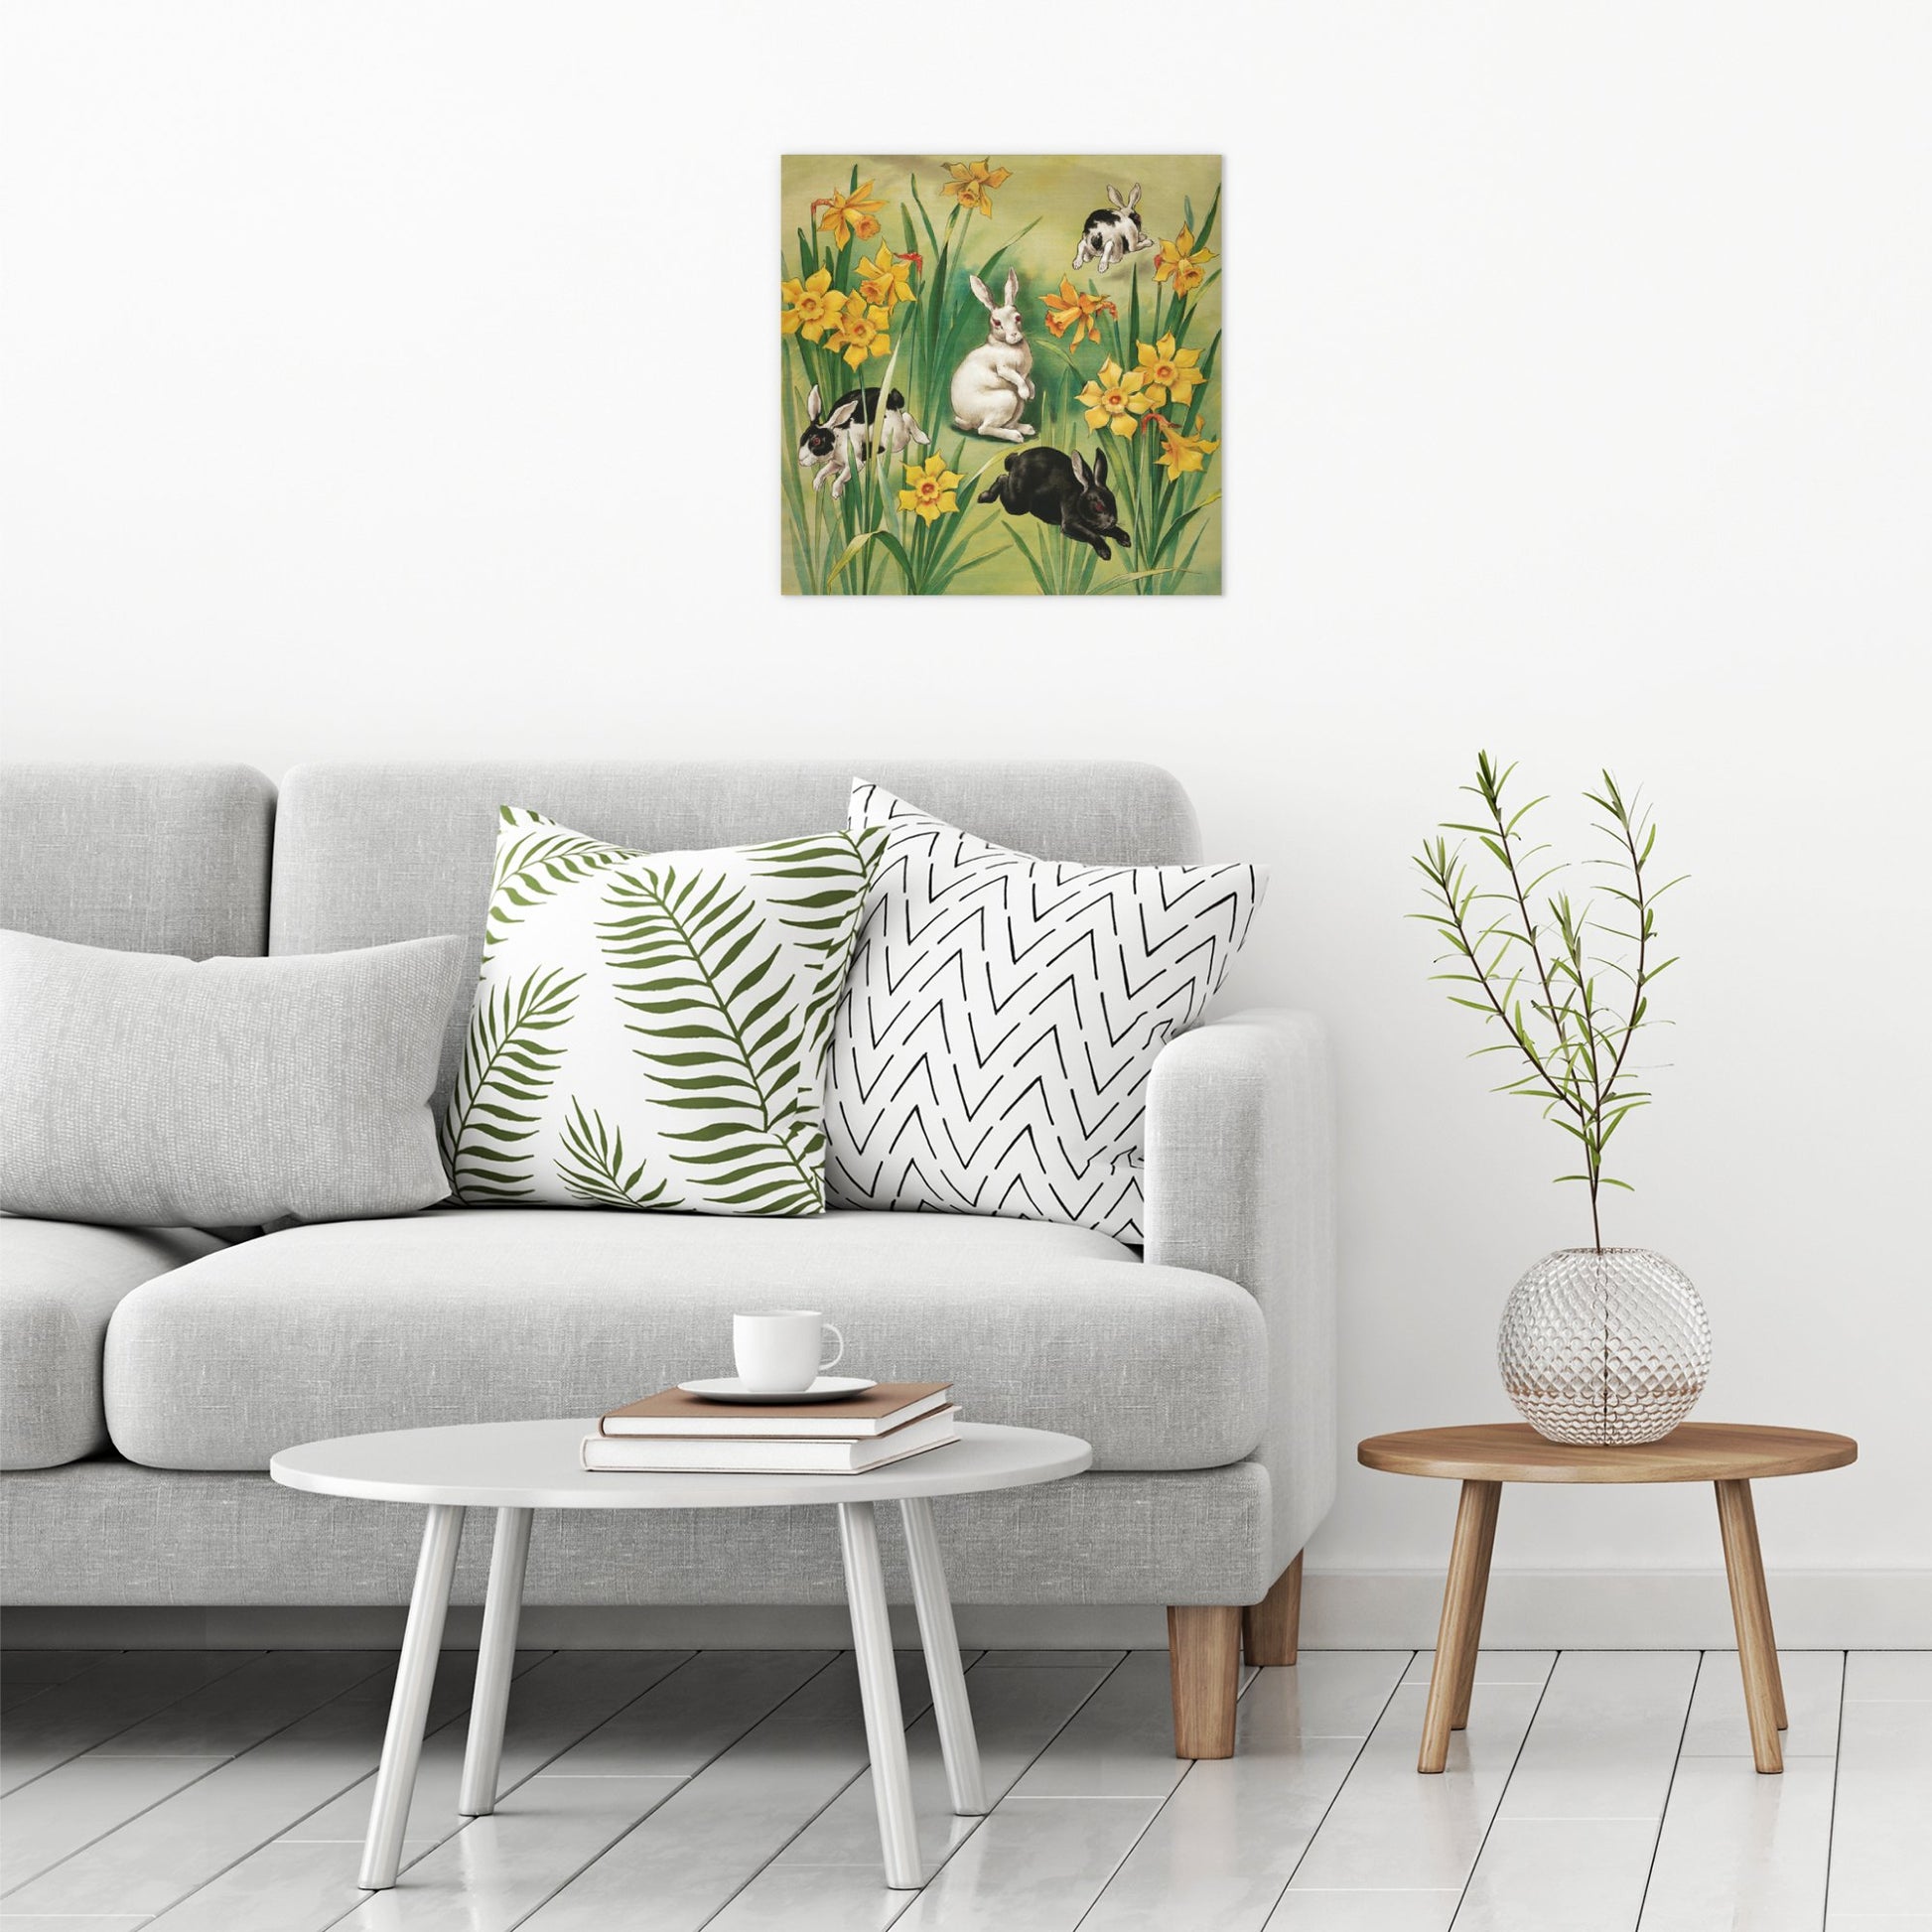 A contemporary modern room view showing a large size metal art poster display plate with printed design of a Bunnies and Daffodils Vintage Illustration